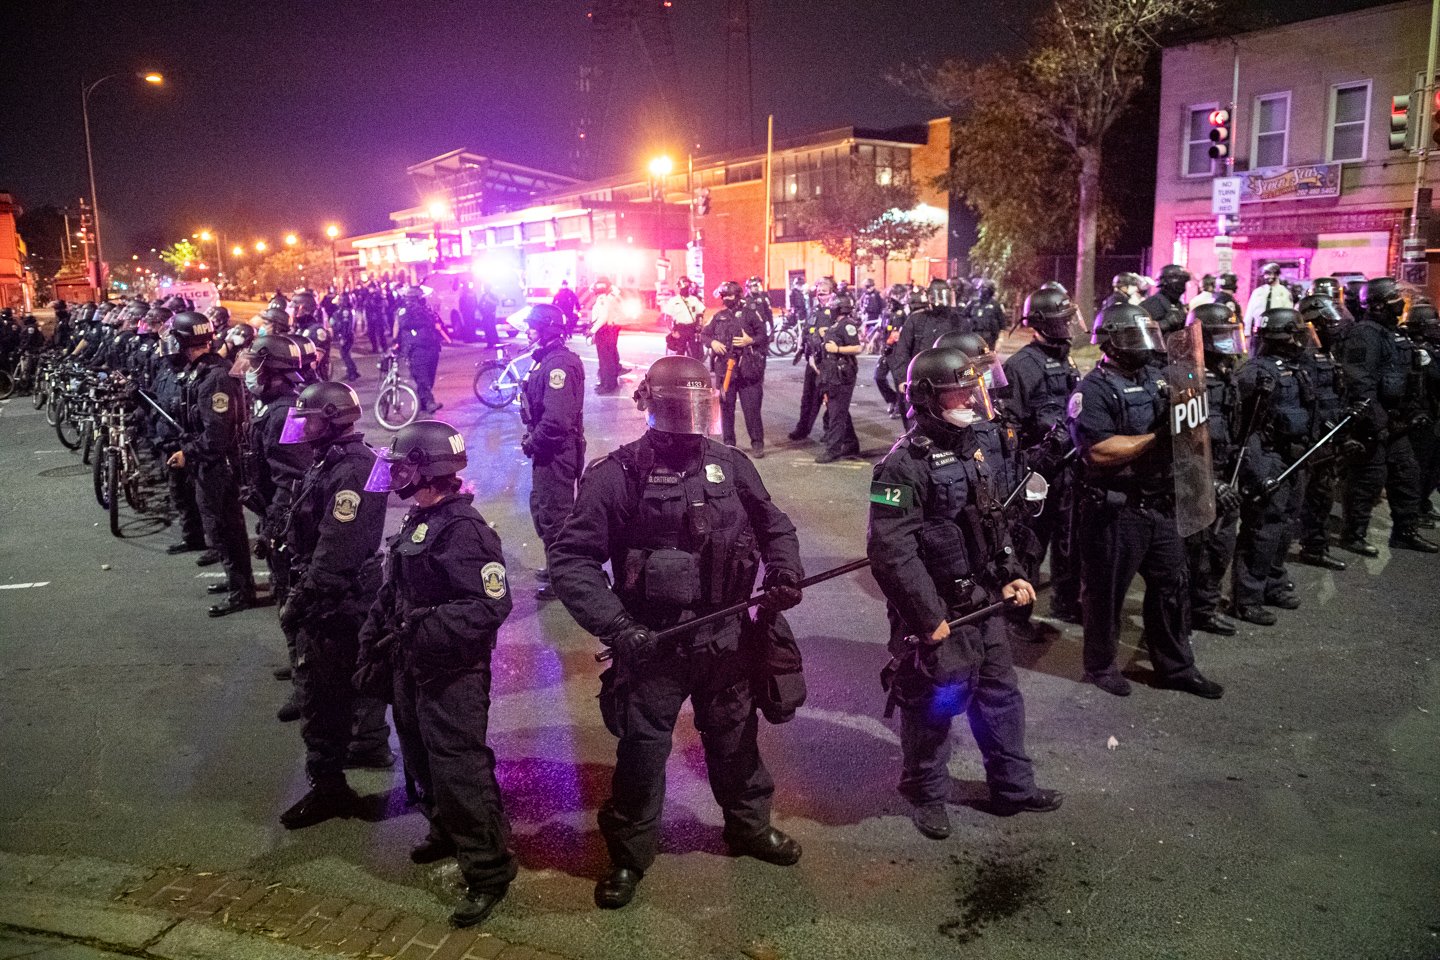  Crowds of riot police standing in formation create a security perimeter near the MPD Fourth District Headquarters after forcefully clearing the area of protesters, in Washington, D.C., on October 27, 2020. (Photo by Graeme Sloan) 